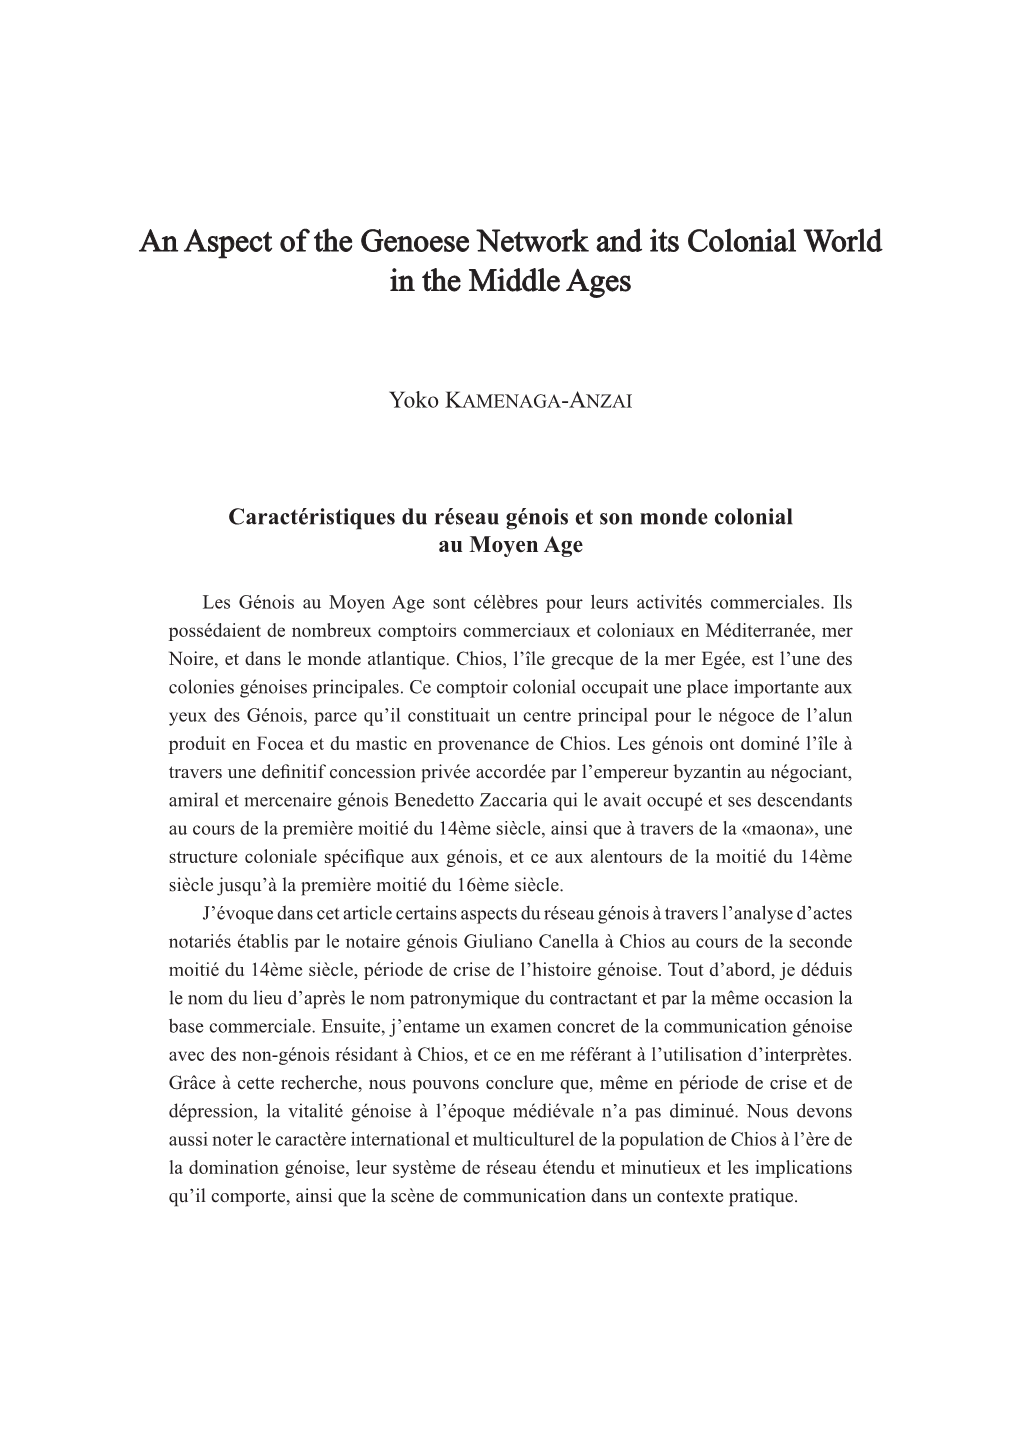 An Aspect of the Genoese Network and Its Colonial World in the Middle Ages